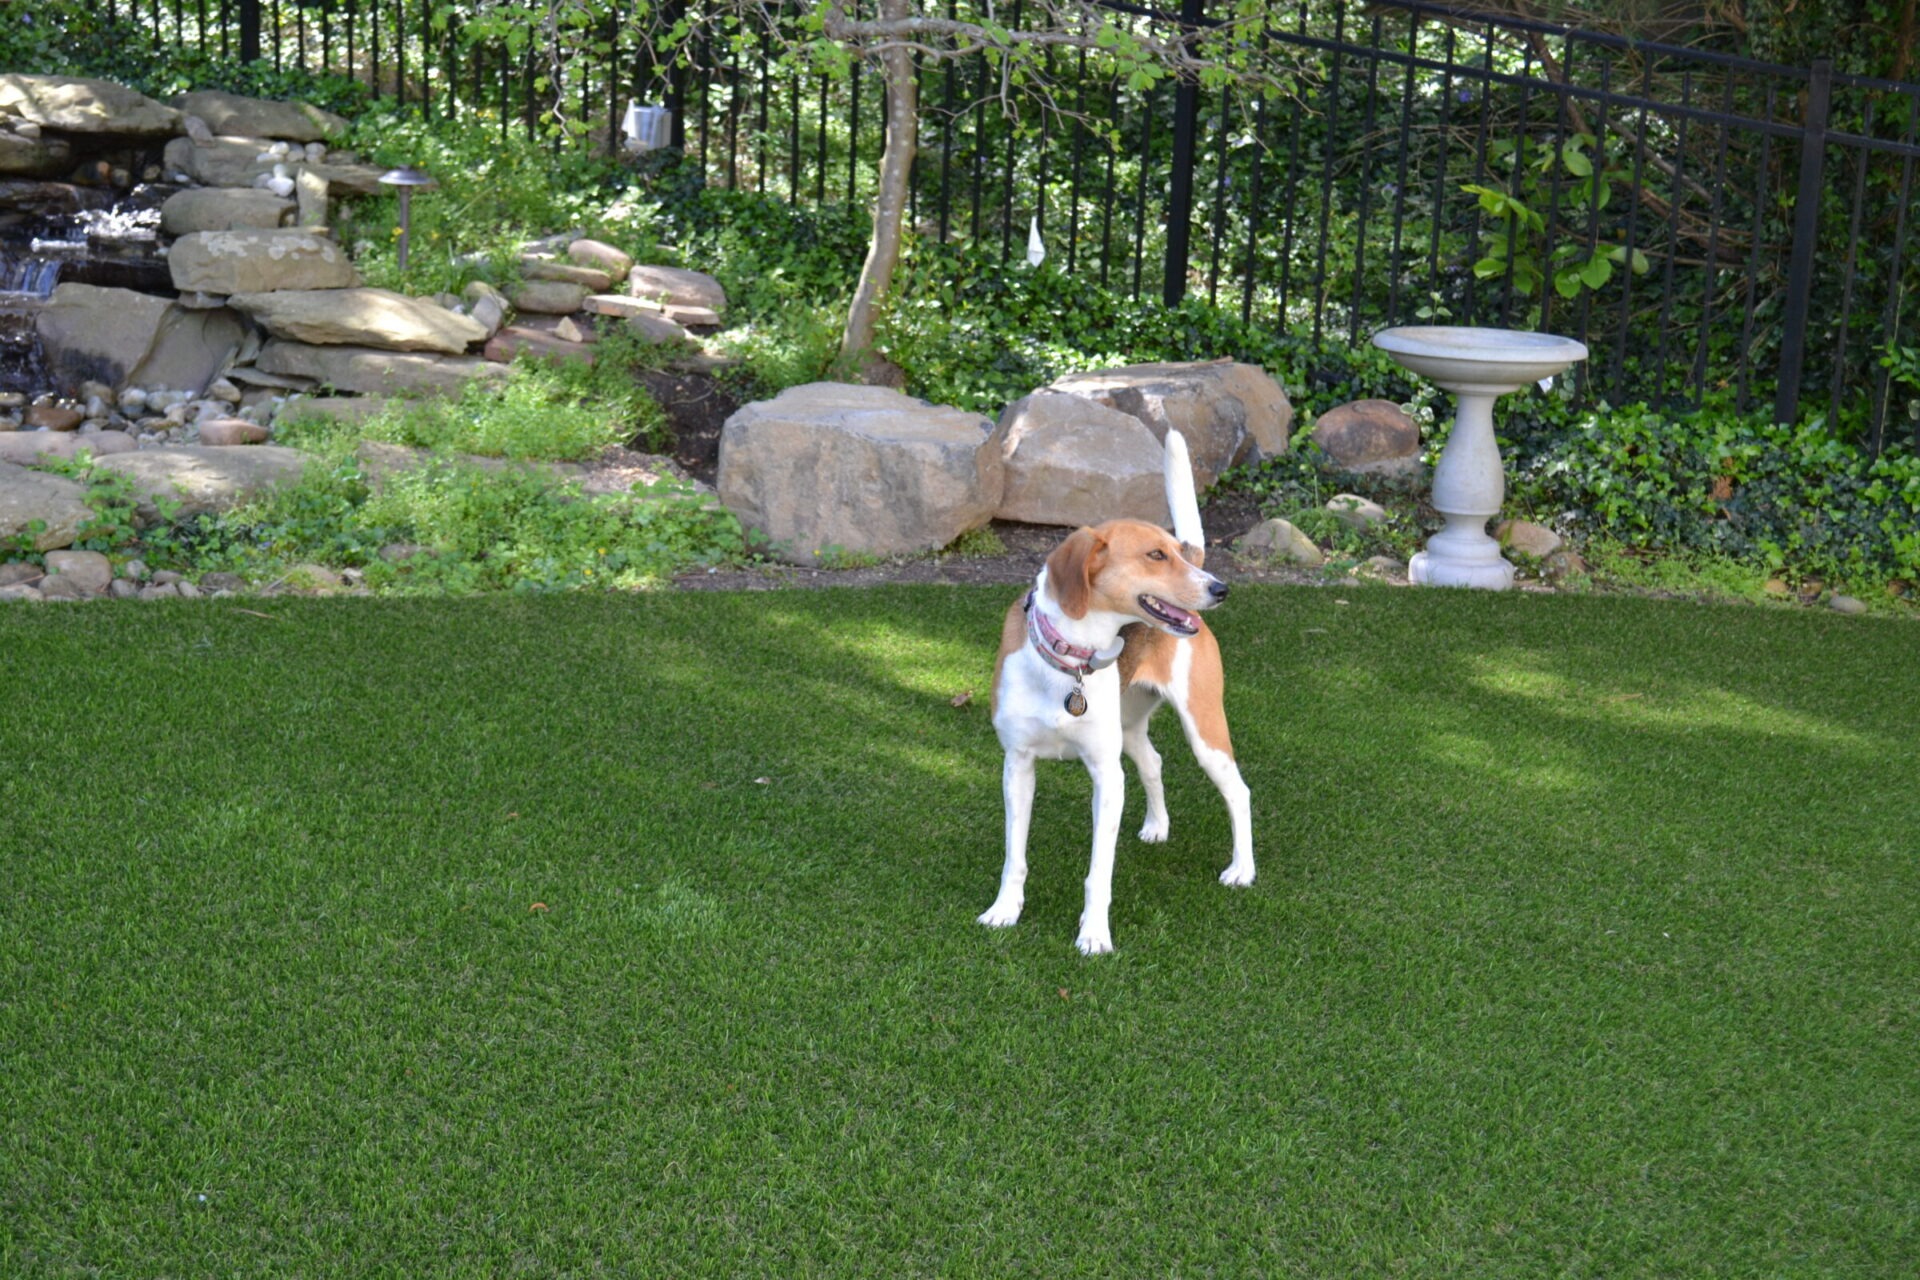 A brown and white dog standing on an artificial turf lawn with a stone waterfall and greenery in the background behind a metal fence.